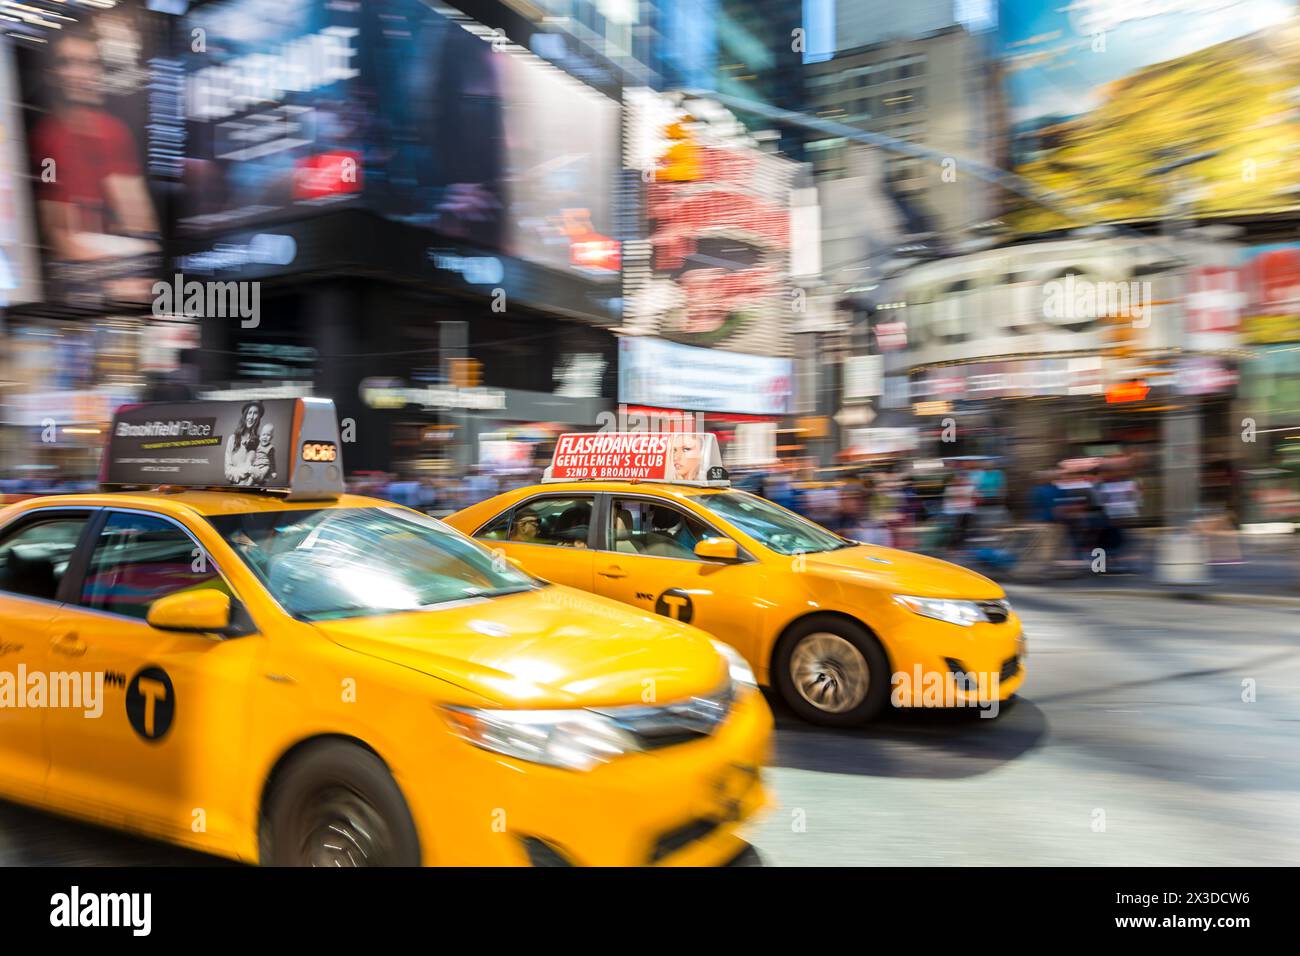 Gelbe Taxis, Times Square, Central Manhattan, New York, USA Stockfoto